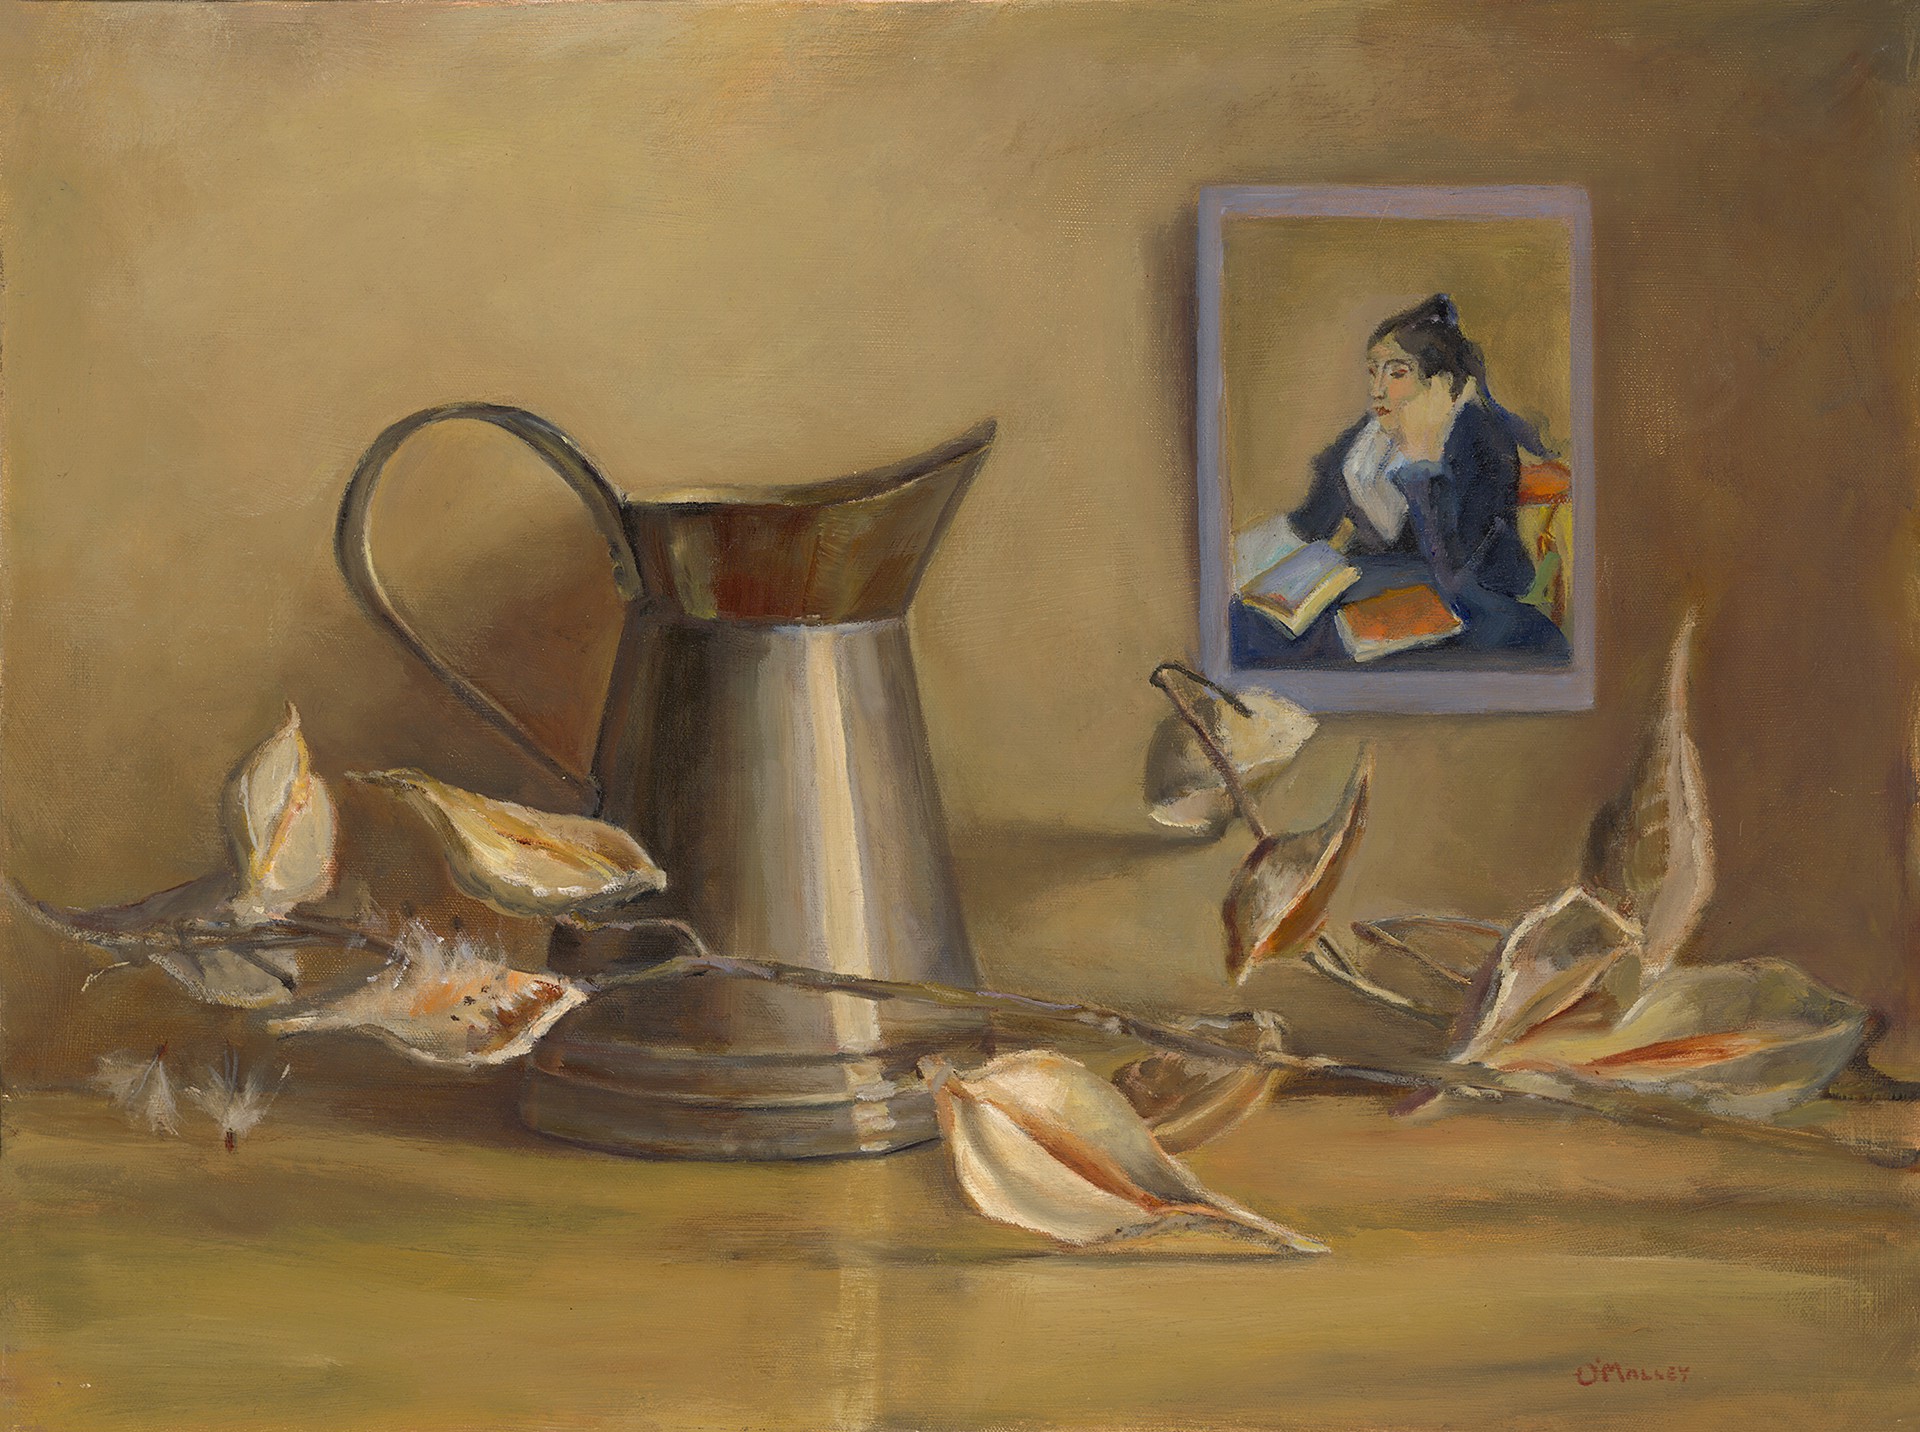 “Still Life with Madame Giroux” by Sheila O'Malley